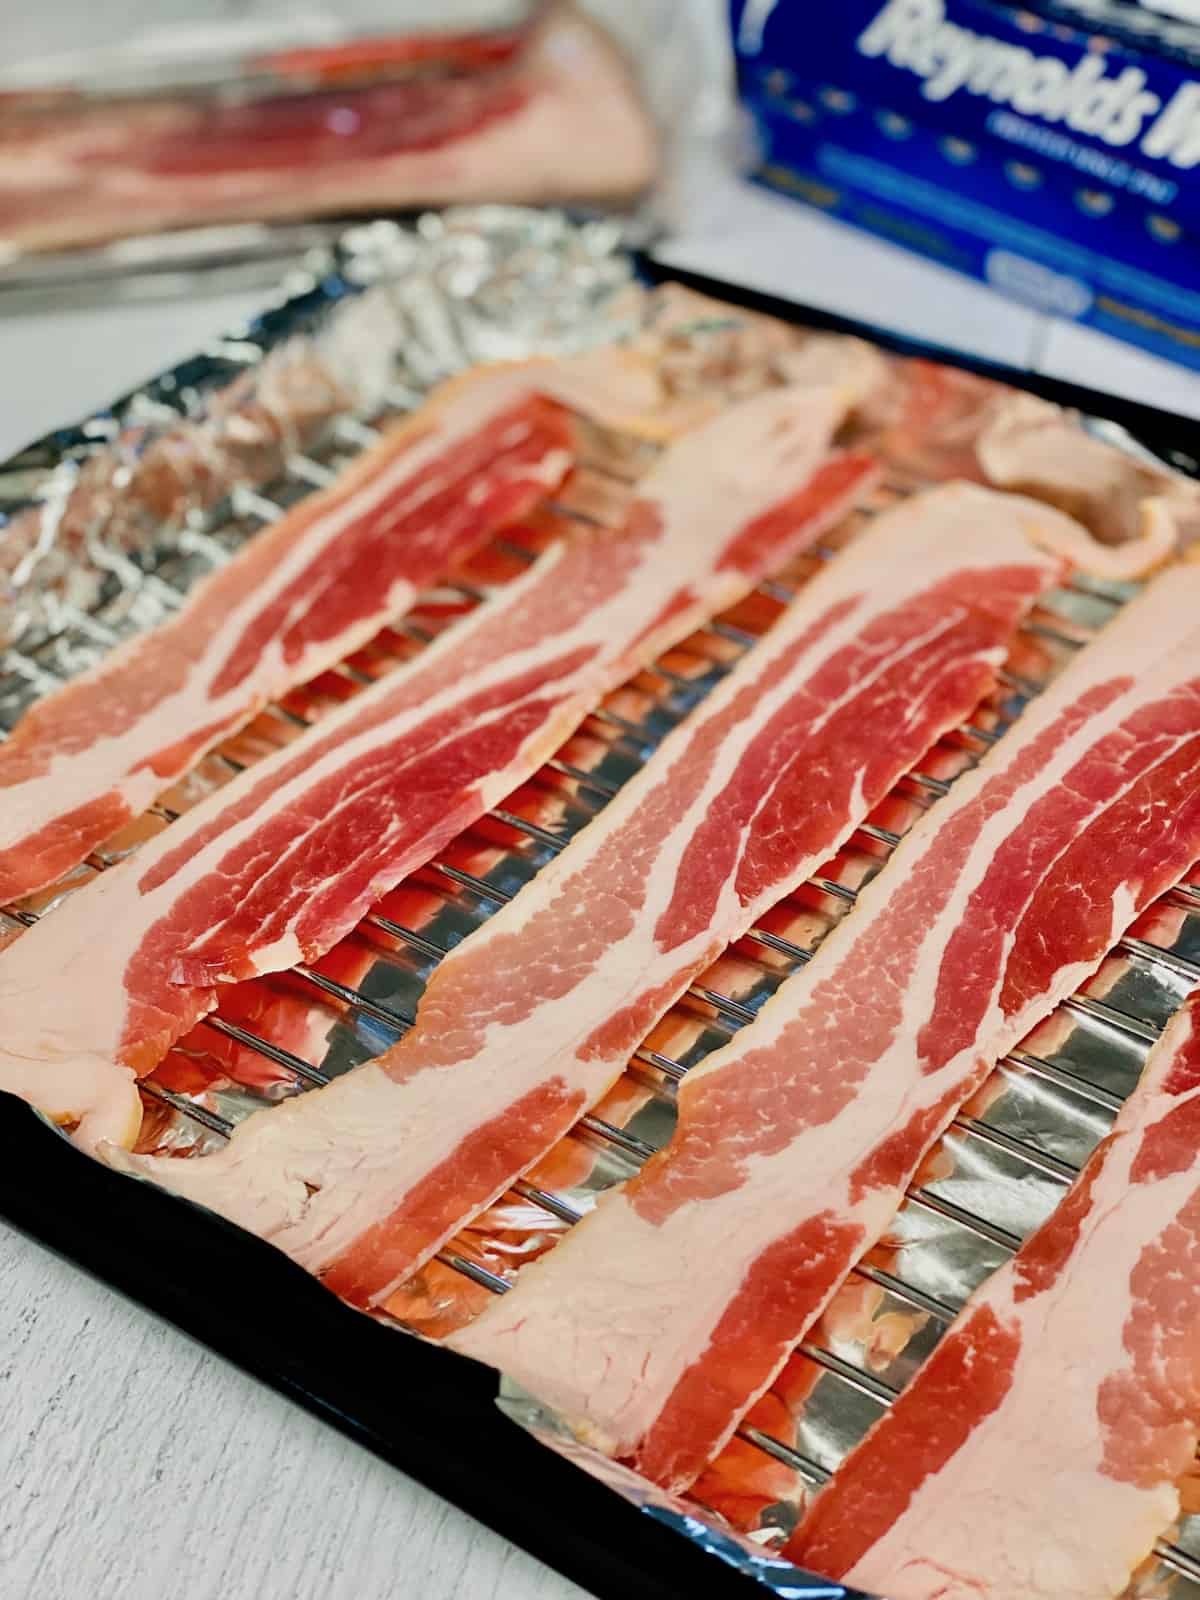 Raw bacon lined up on a baking rack lined with foil over the bottom pan.